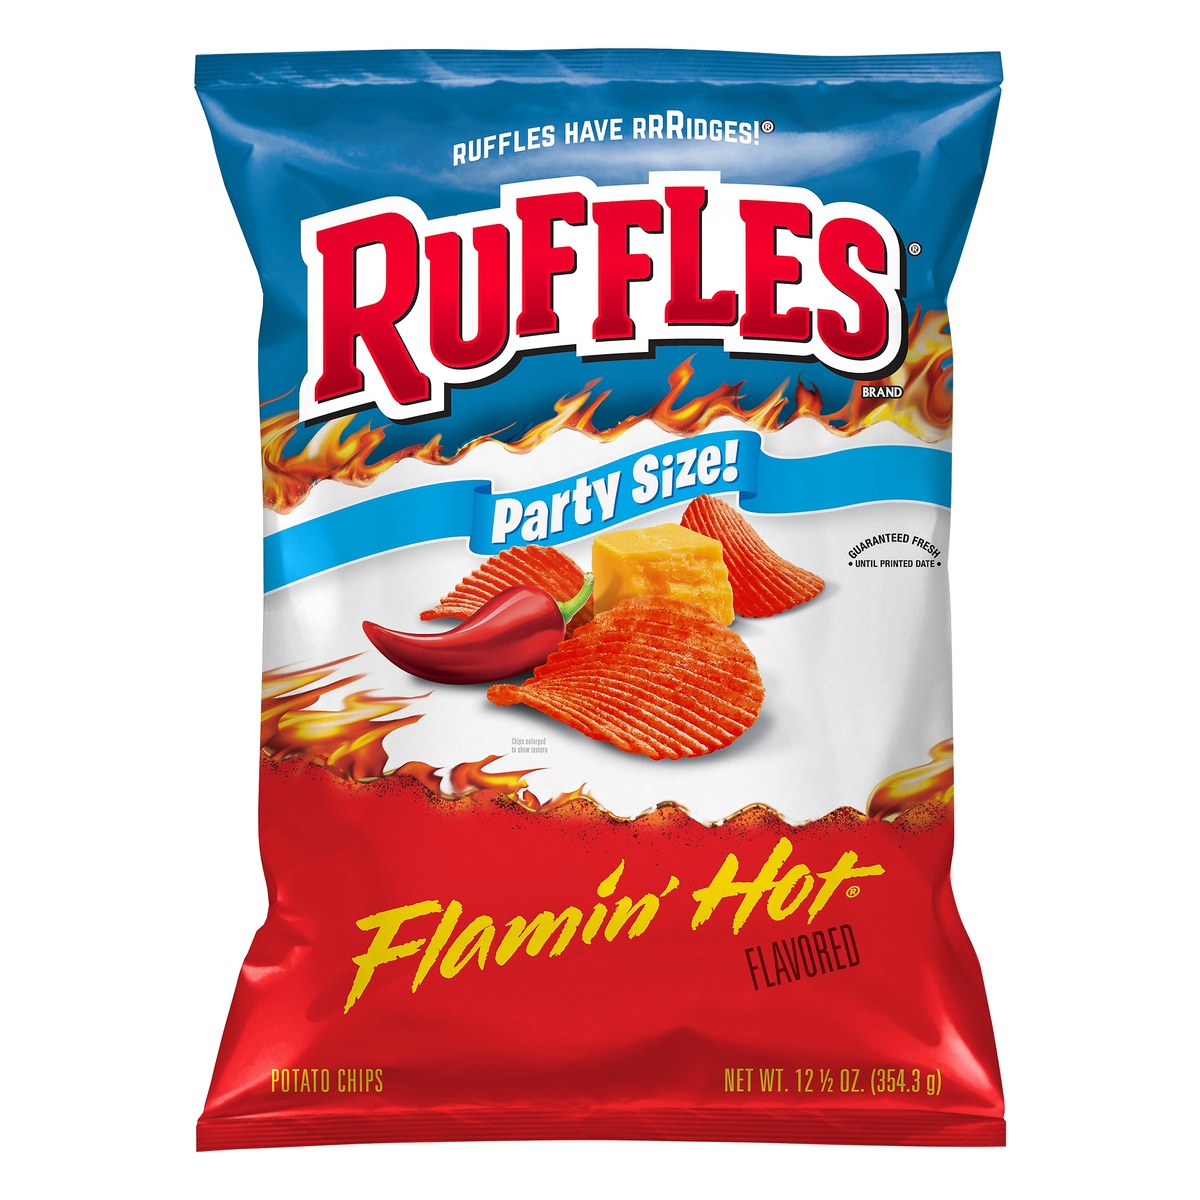 slide 6 of 6, Ruffles Party Size Flamin Hot Flavored Potato Chips 12.5 oz, 1 ct